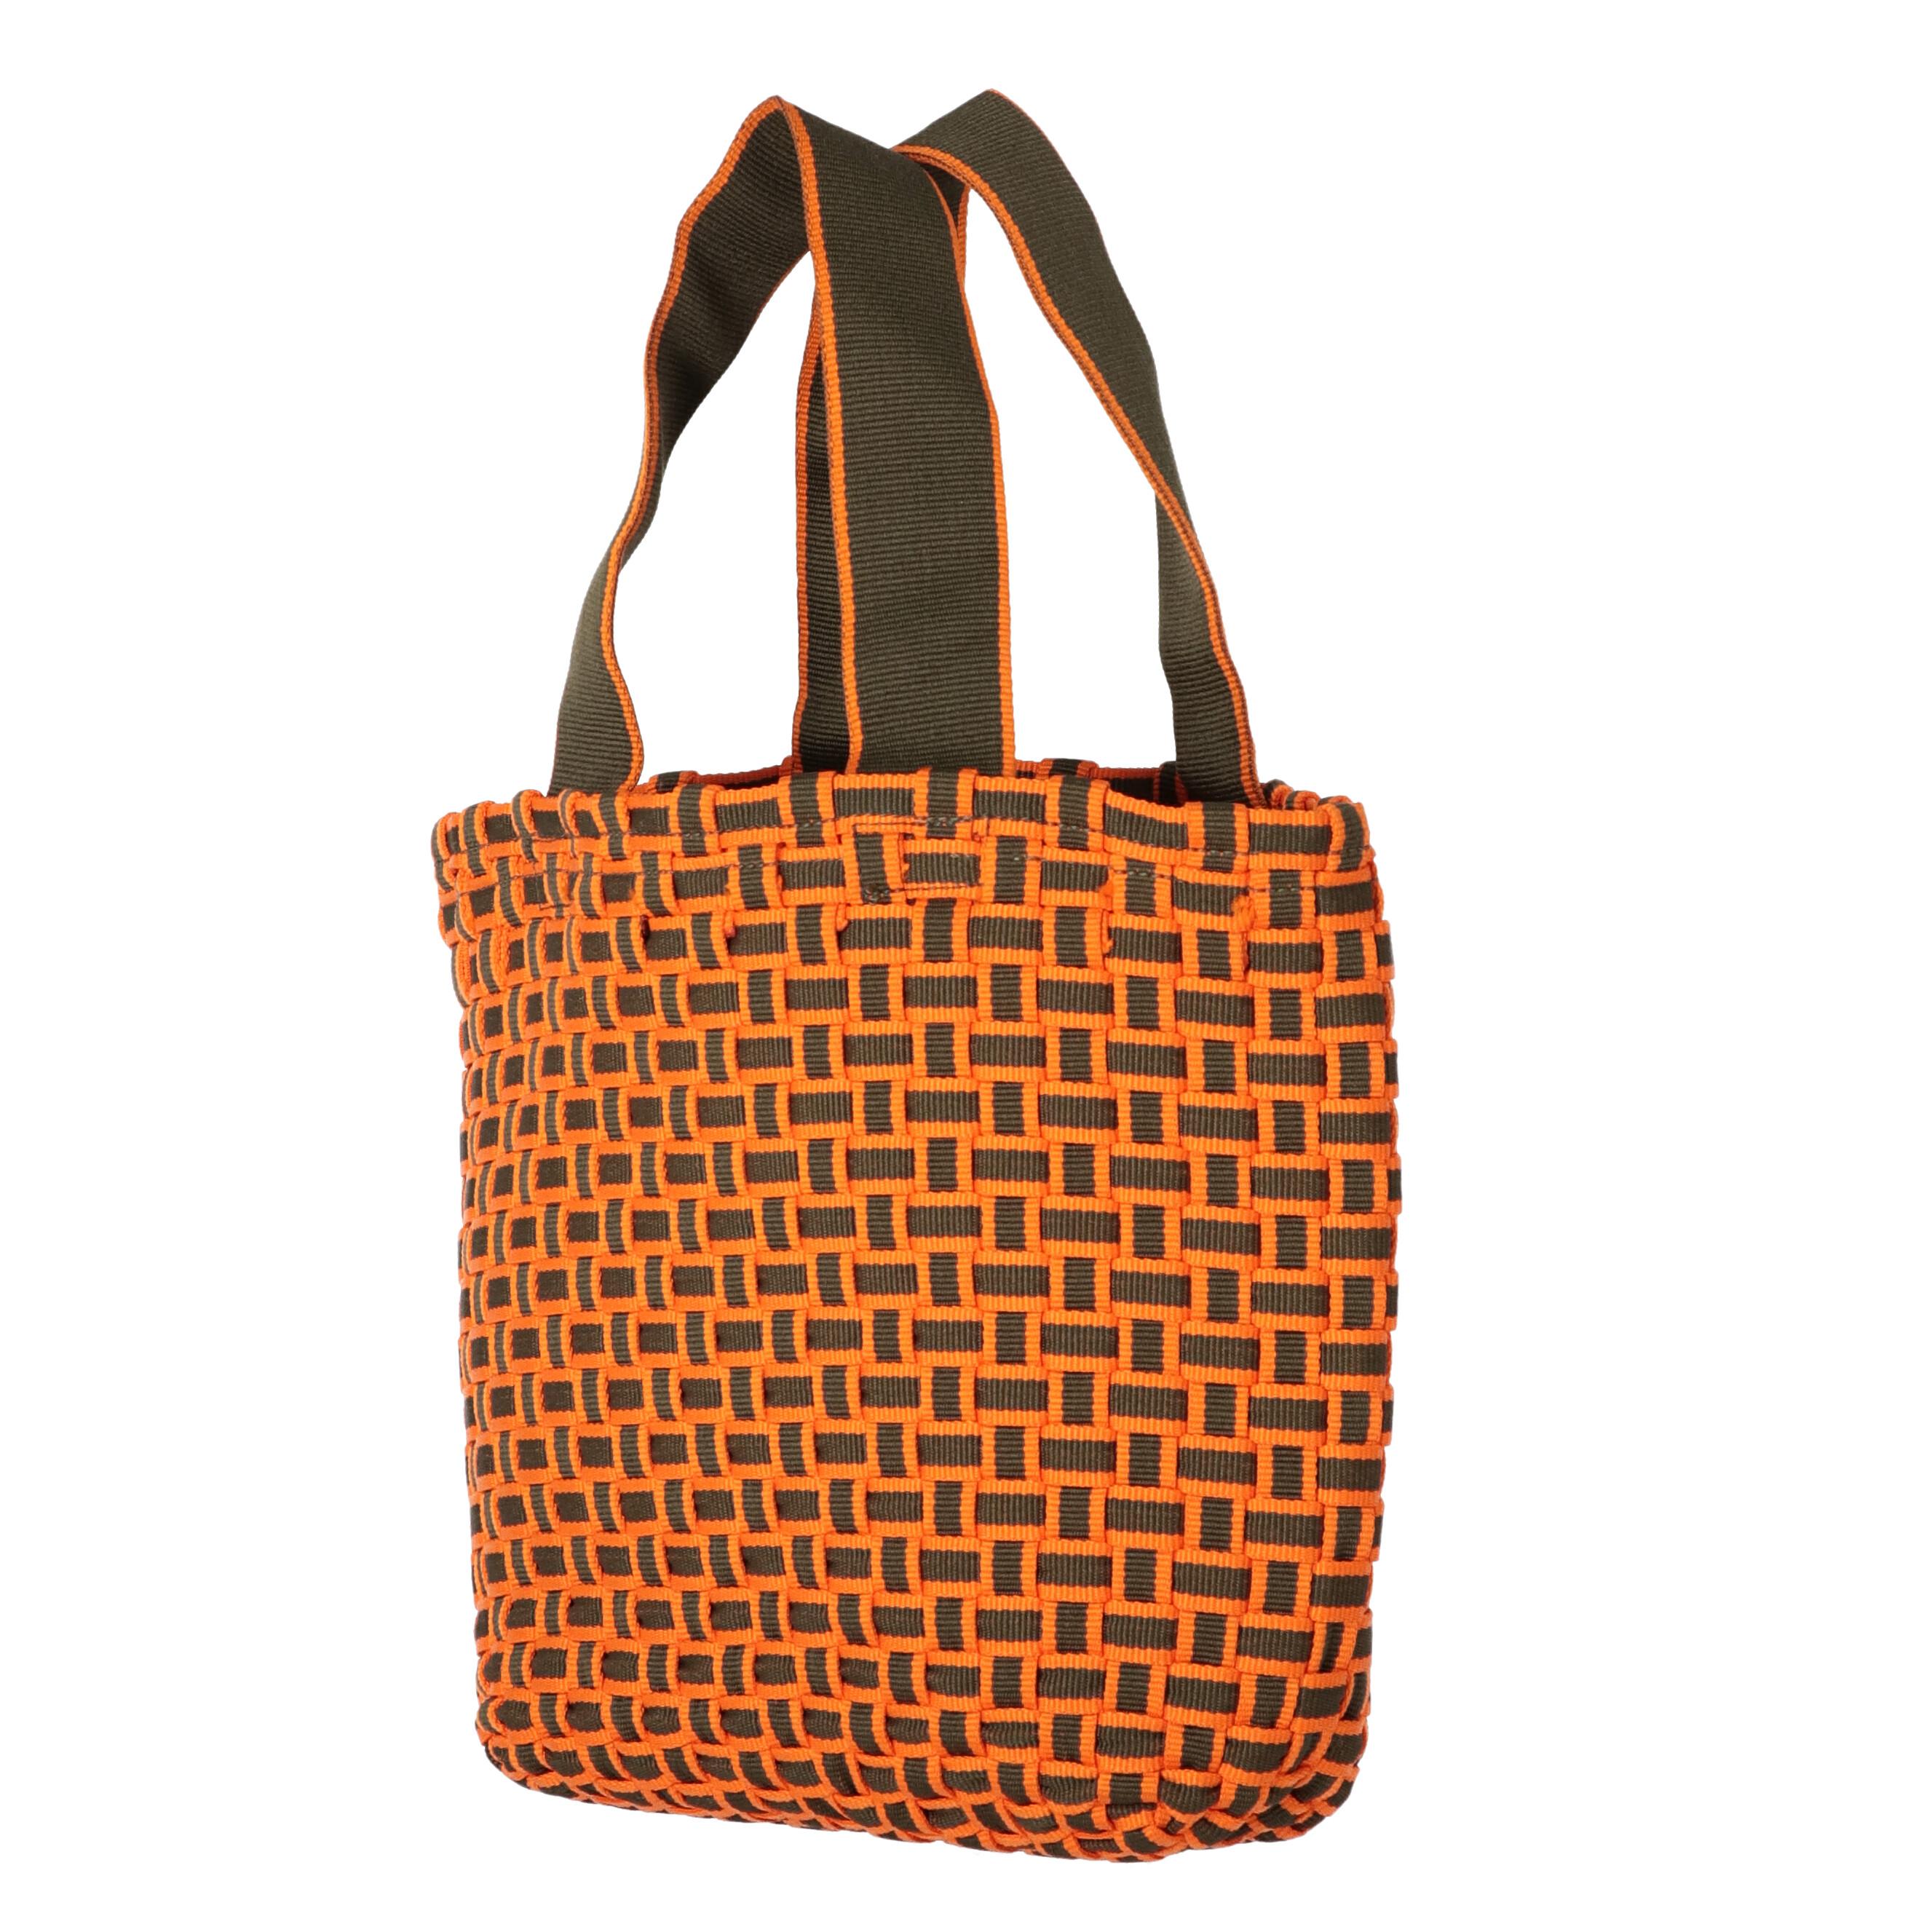 Adorable Miu Miu interwoven bicolor (brown-orange) nylon gros grain lightweight handbag, featuring no closure, two loosen handles and a inner small plastic bag with velcro strap. 

Years: 2000s

Made in Italy

Height: 21 cm
Width: 27 cm
Depth: 6 cm